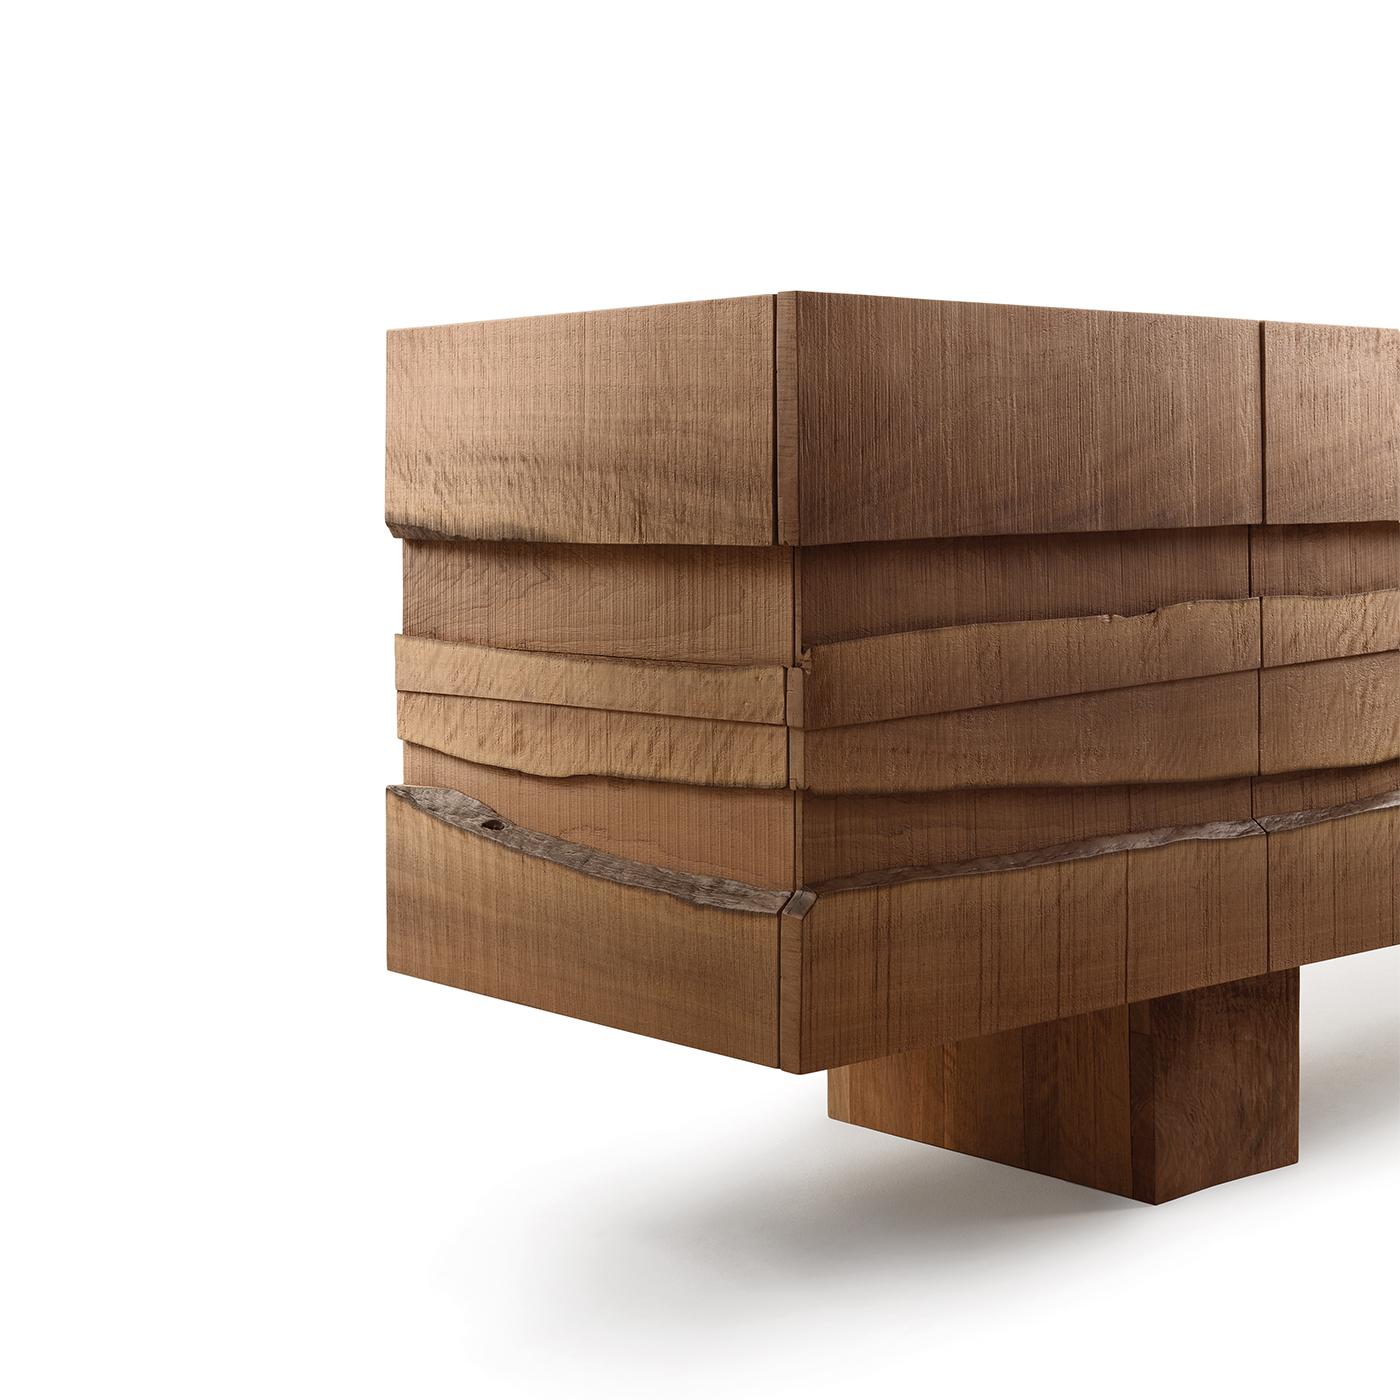 A superb showcase of skillful craftsmanship, this striking sideboard is a singular work of functional art exquisitely designed by Marc Sadler. Handcrafted of prized national walnut wood with a natural finish, the five doors of this piece are